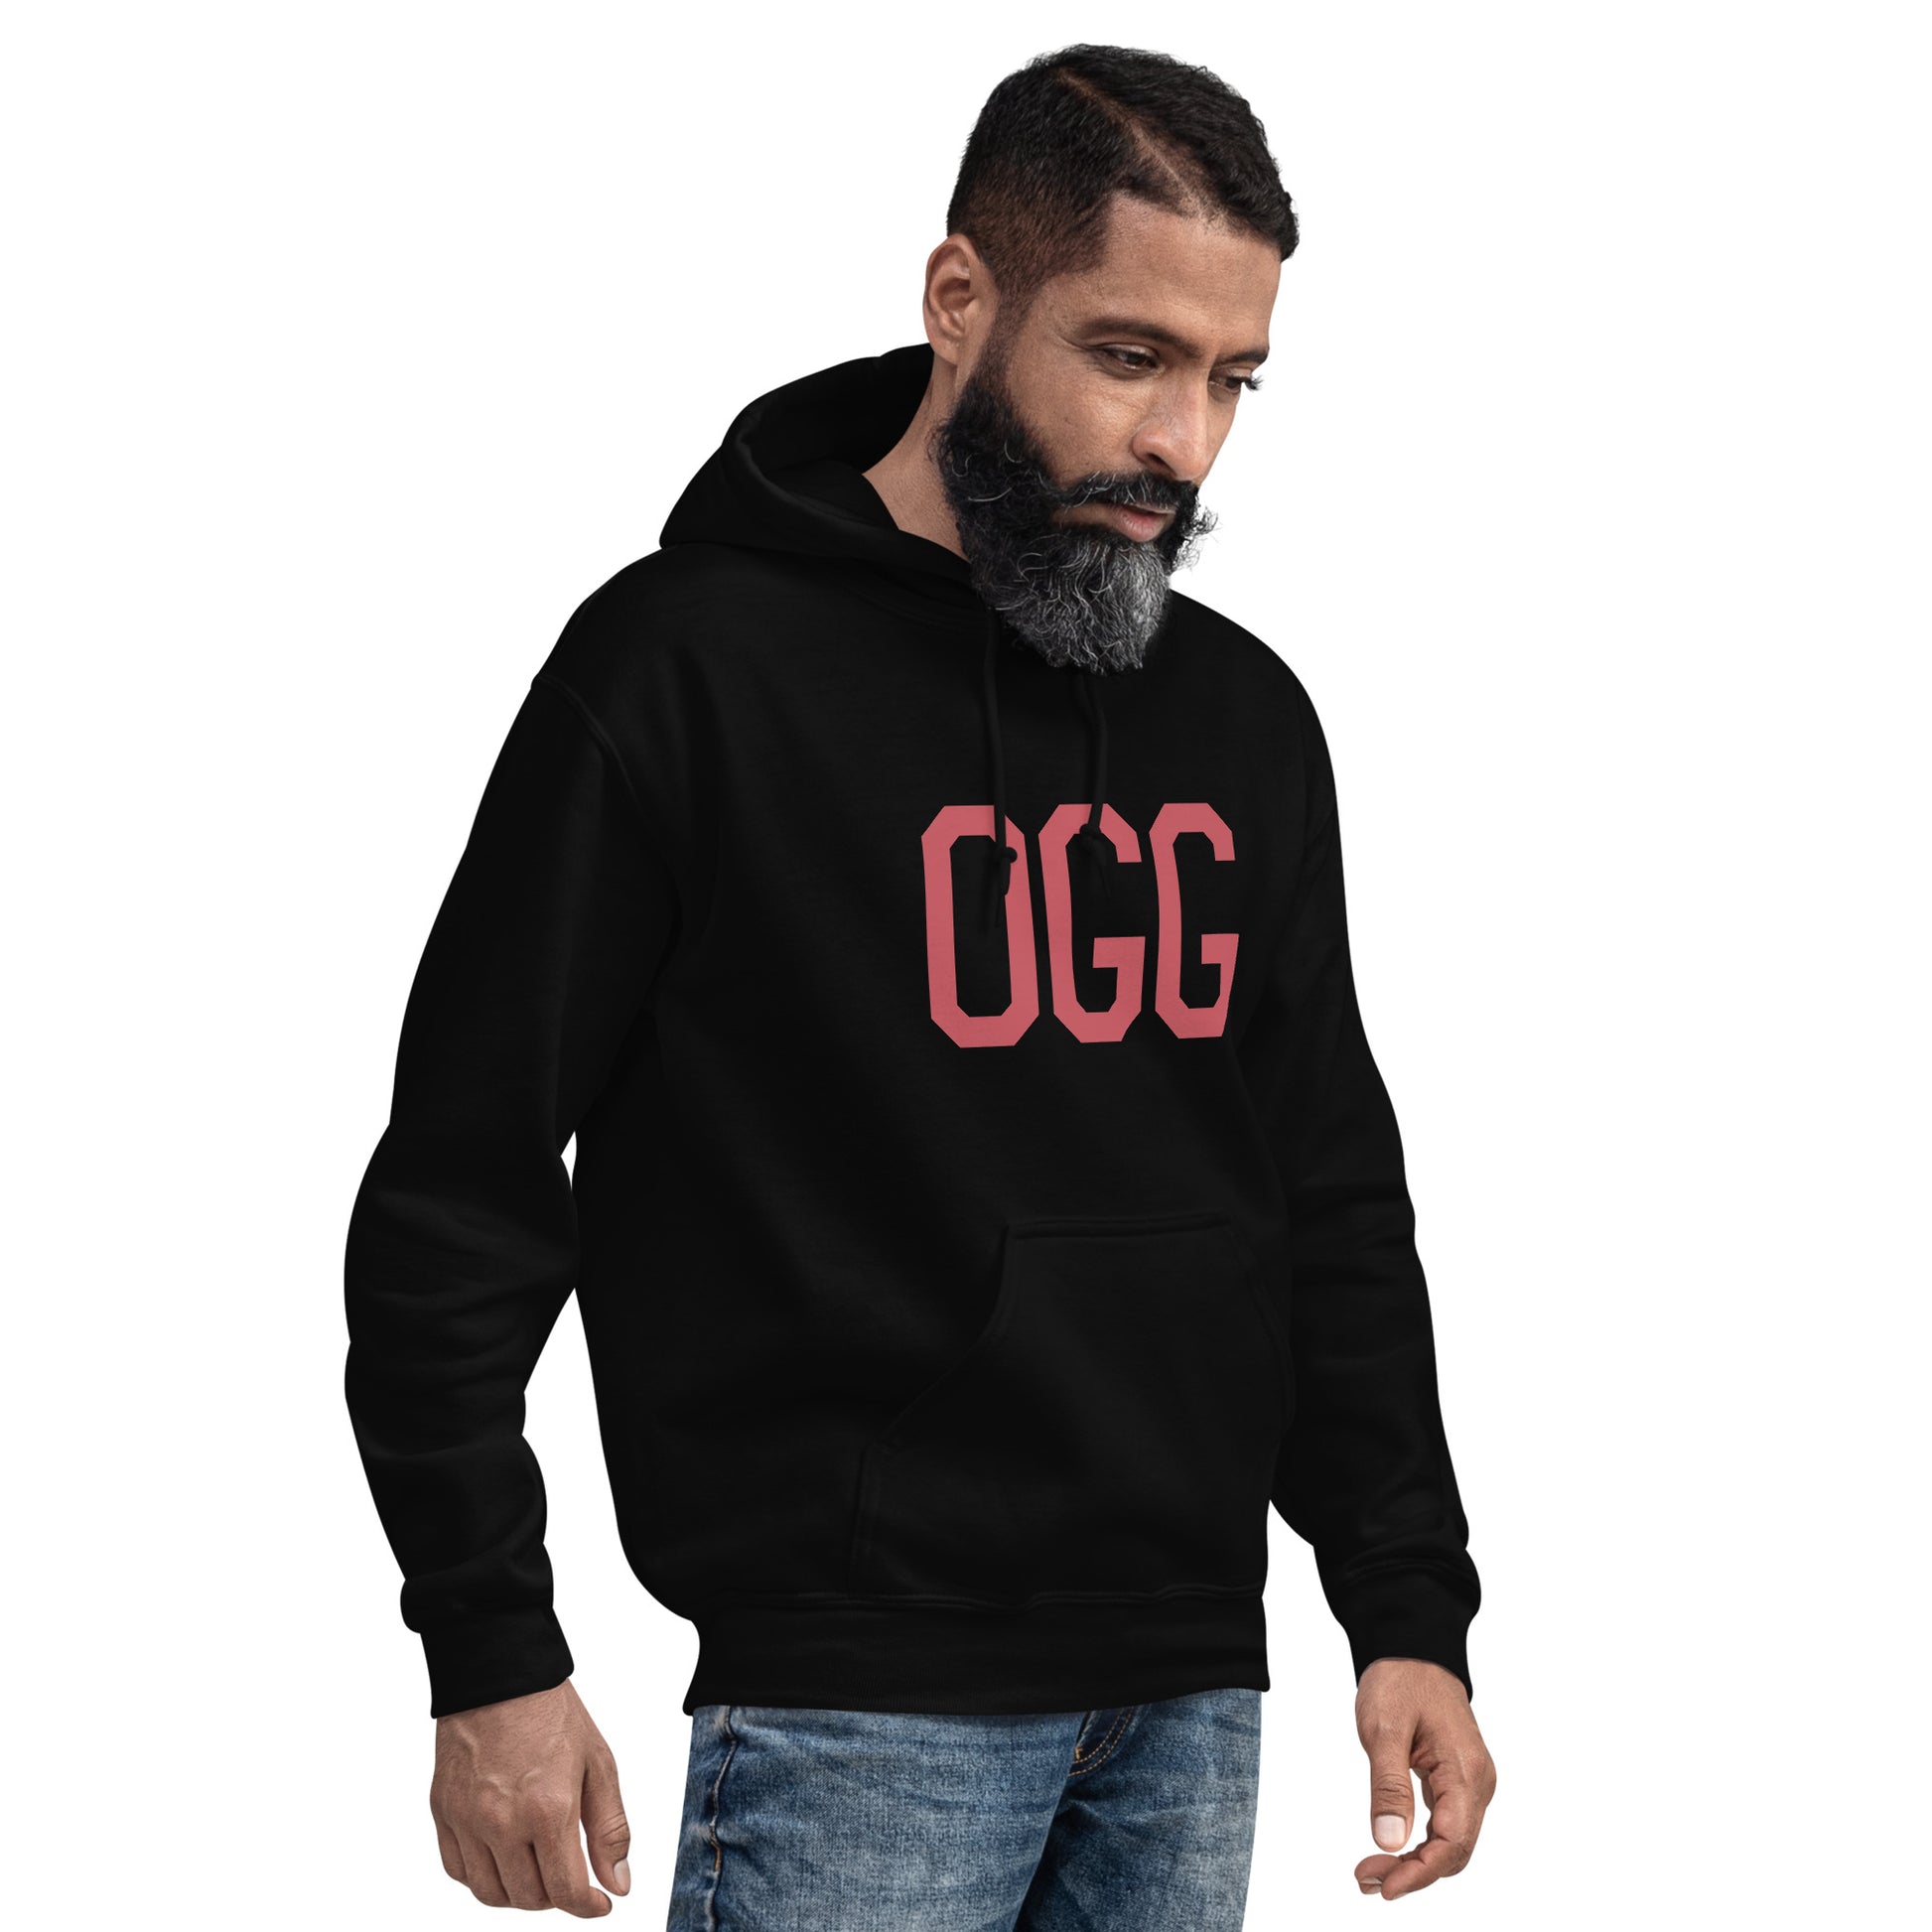 Aviation Enthusiast Hoodie - Deep Pink Graphic • OGG Maui • YHM Designs - Image 06